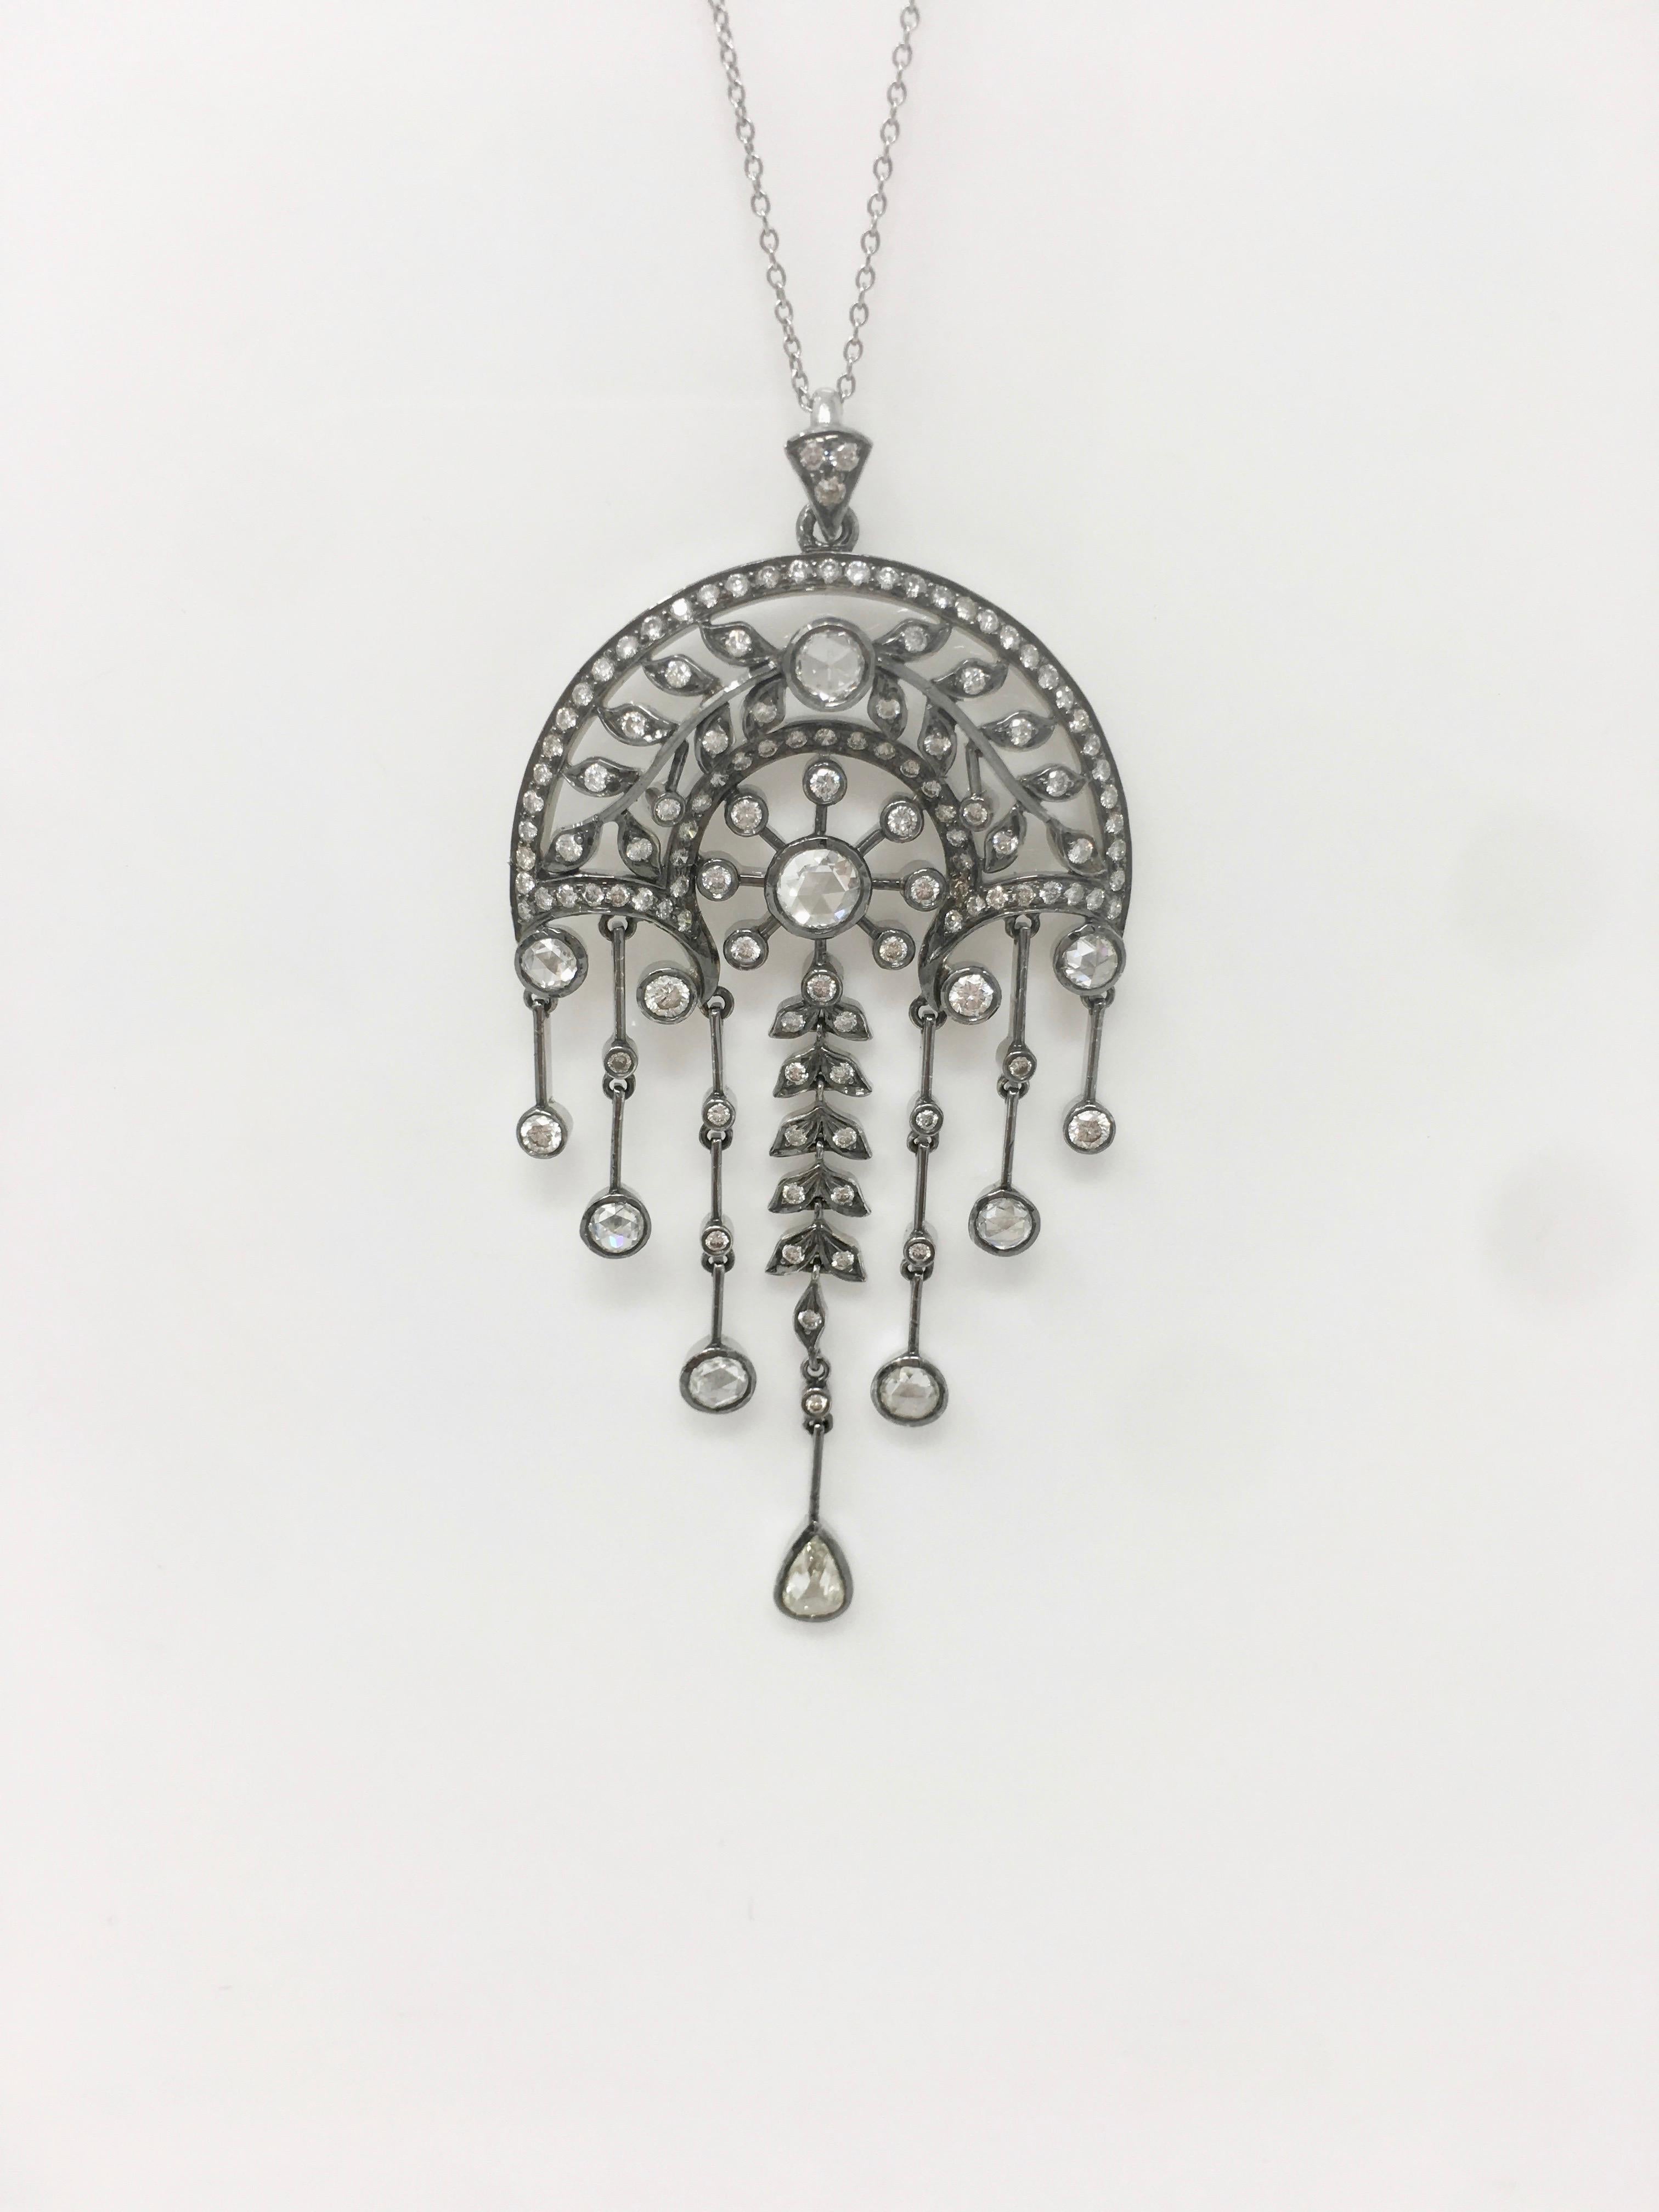 An attractive and elegant rose cut diamond and round brilliant cut diamond pendant hand crafted  by Moguldiam Inc in polish black 18k white gold (black rhodium ) . The total diamond weight on the pendant is 3.82 carat with H I color and VS clarity.